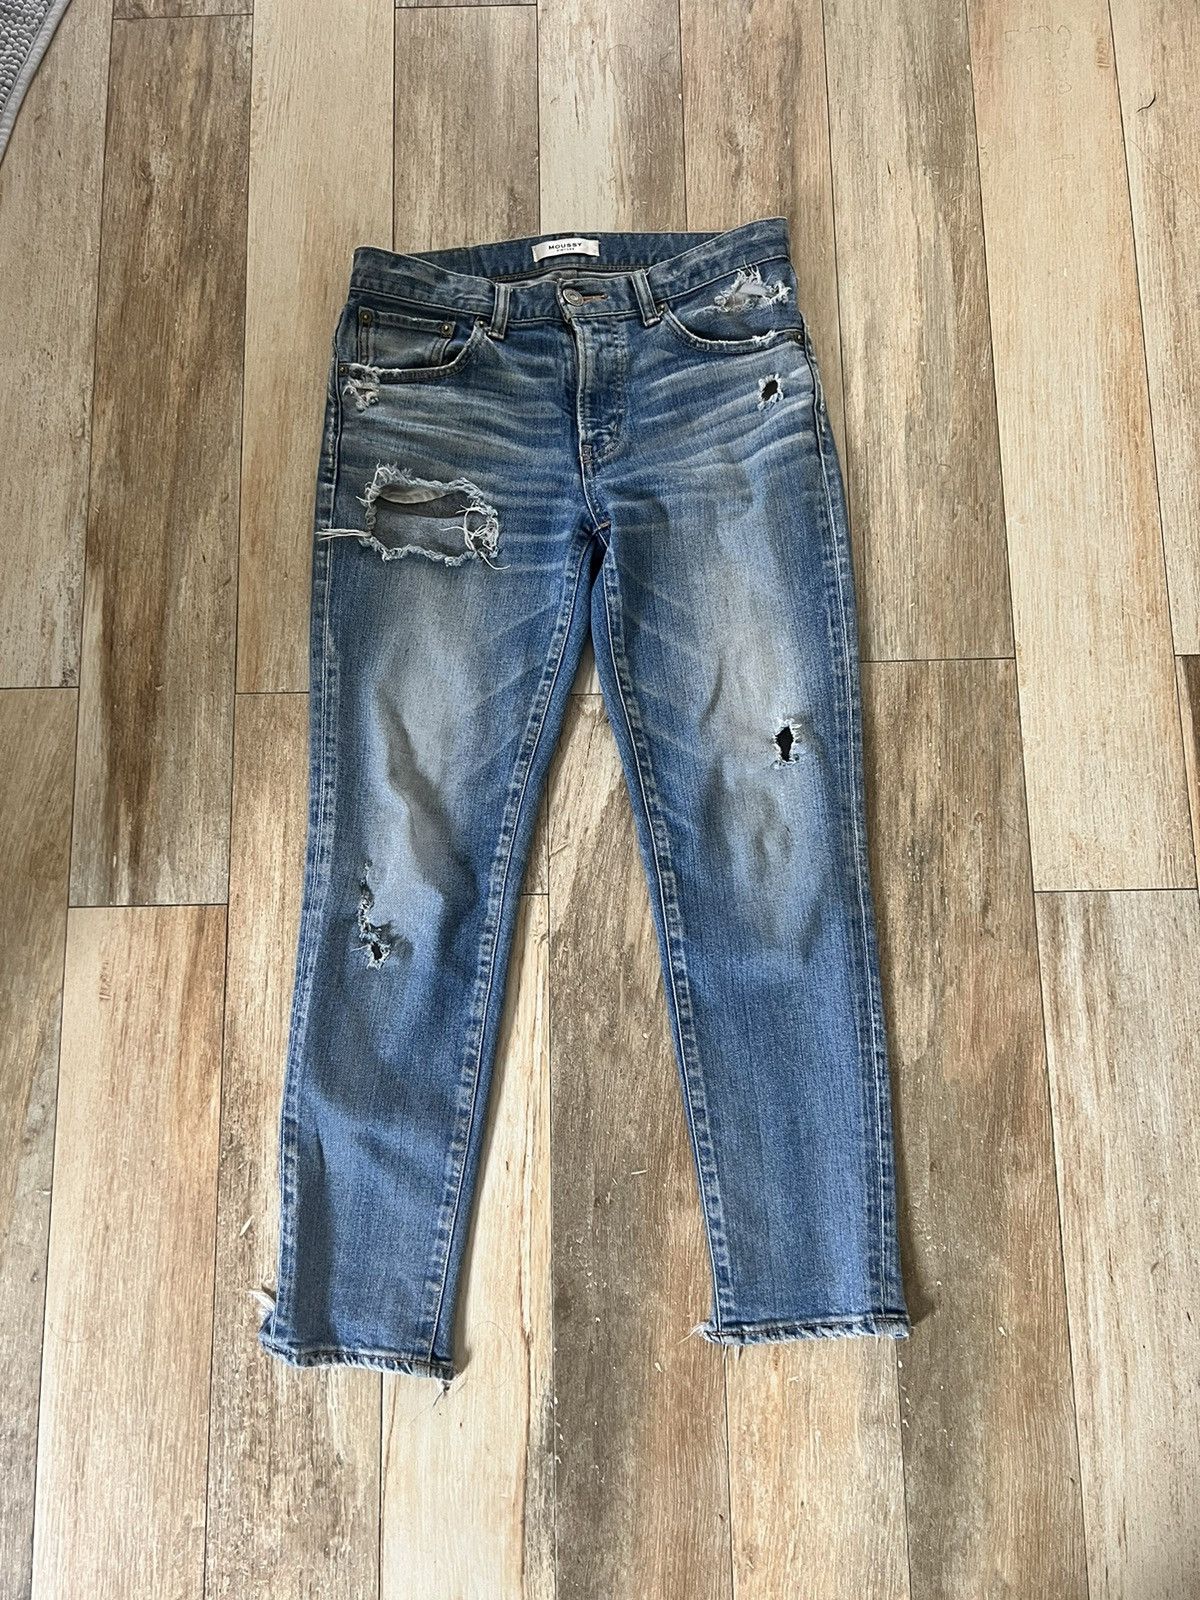 Japanese Brand Moussy Vintage Distressed Blue Jeans Size 27" / US 4 / IT 40 - 4 Thumbnail